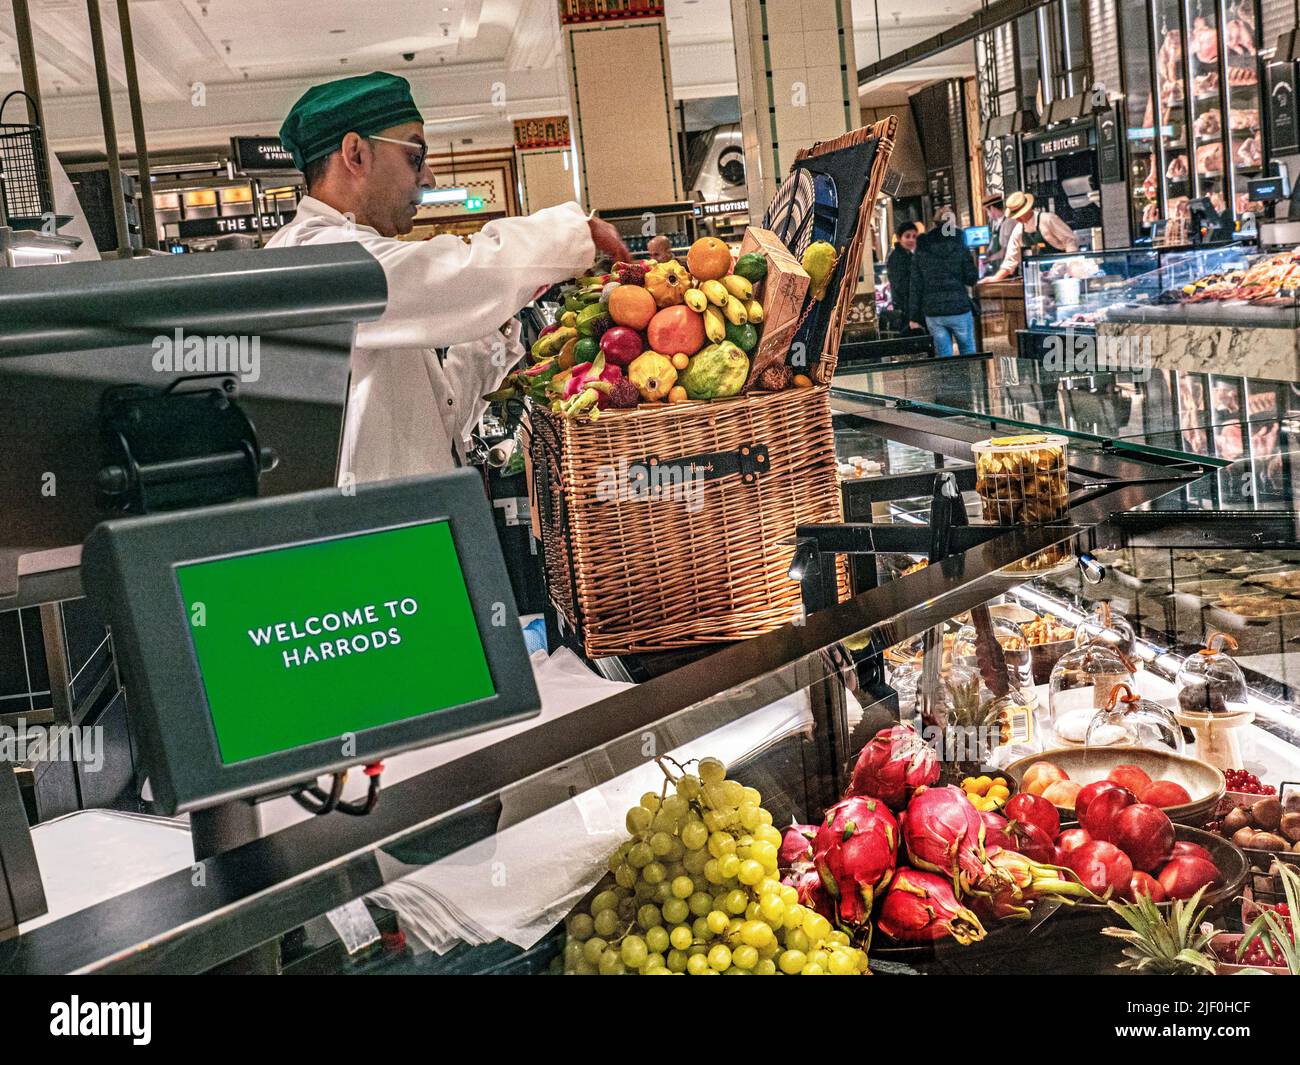 Harrods Food Hall interior with sales assistant preparing a fresh fruit Harrods hamper basket display 'Welcome to Harrods' weighing machine and wrapping point in foreground. Harrods Food Hall, Mall,  Brompton Rd, Knightsbridge, London SW1X 7XL Stock Photo